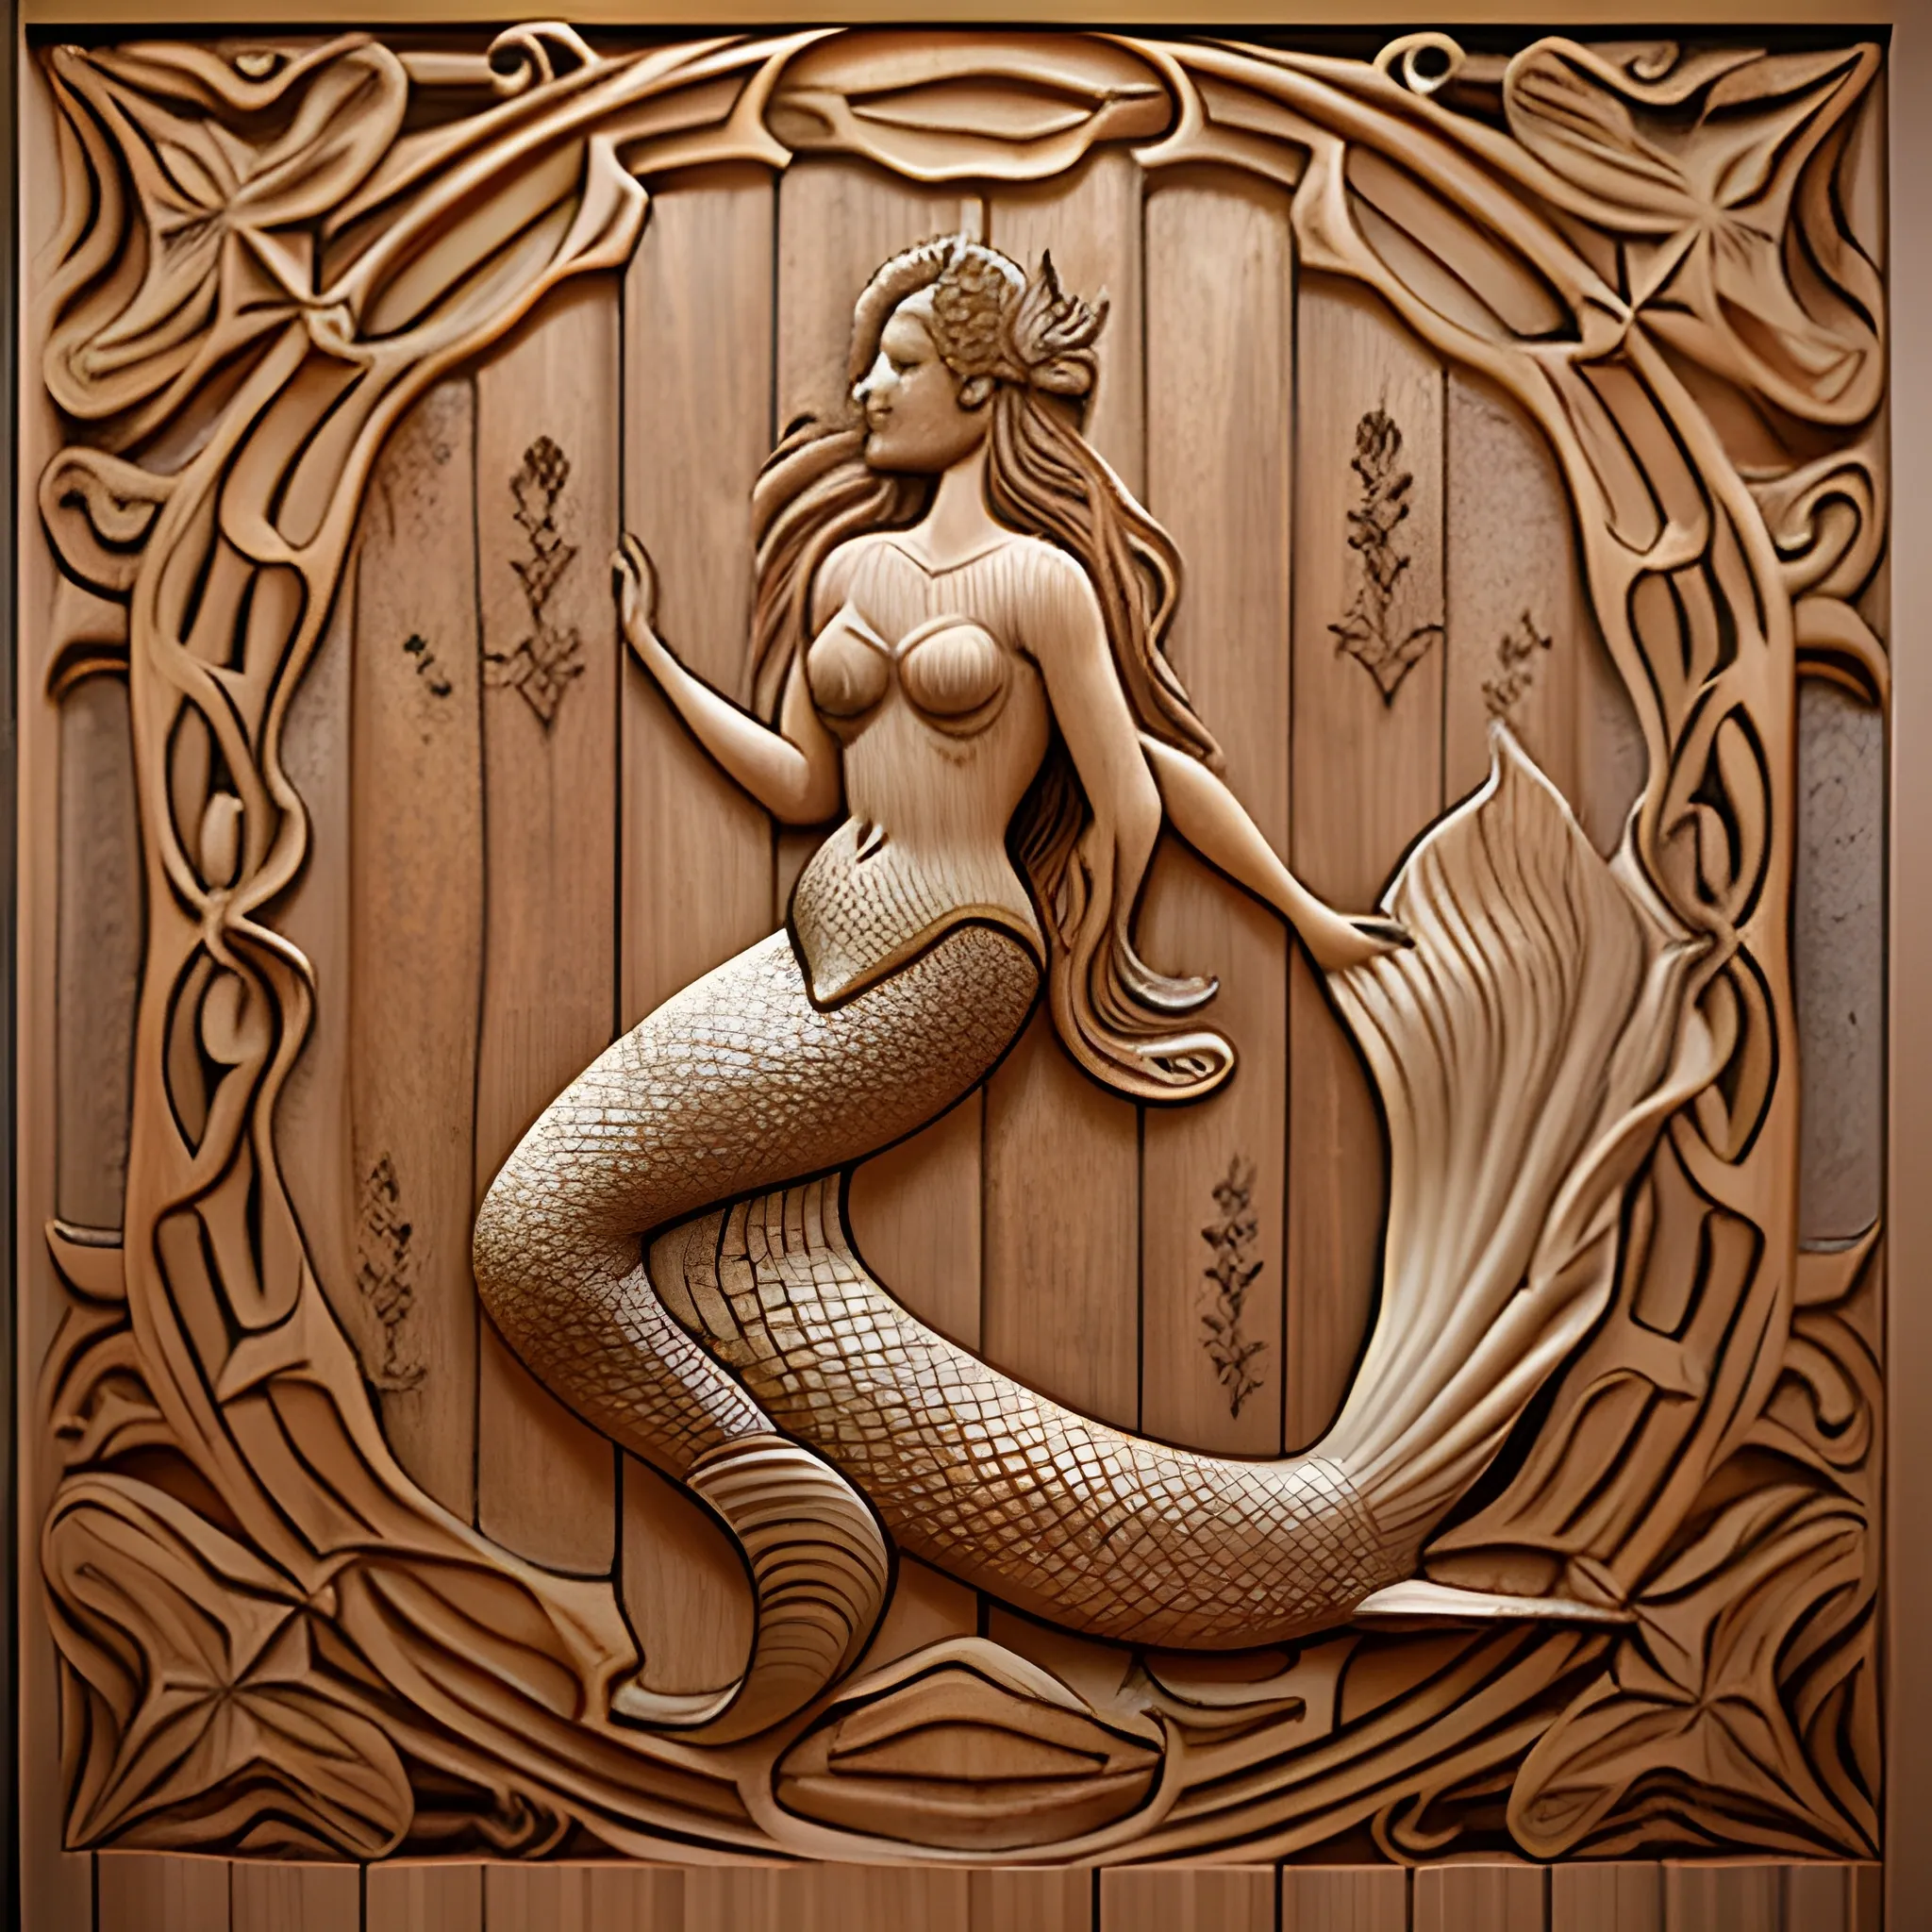 mermaid in carved wooden backdrop panel, 3D